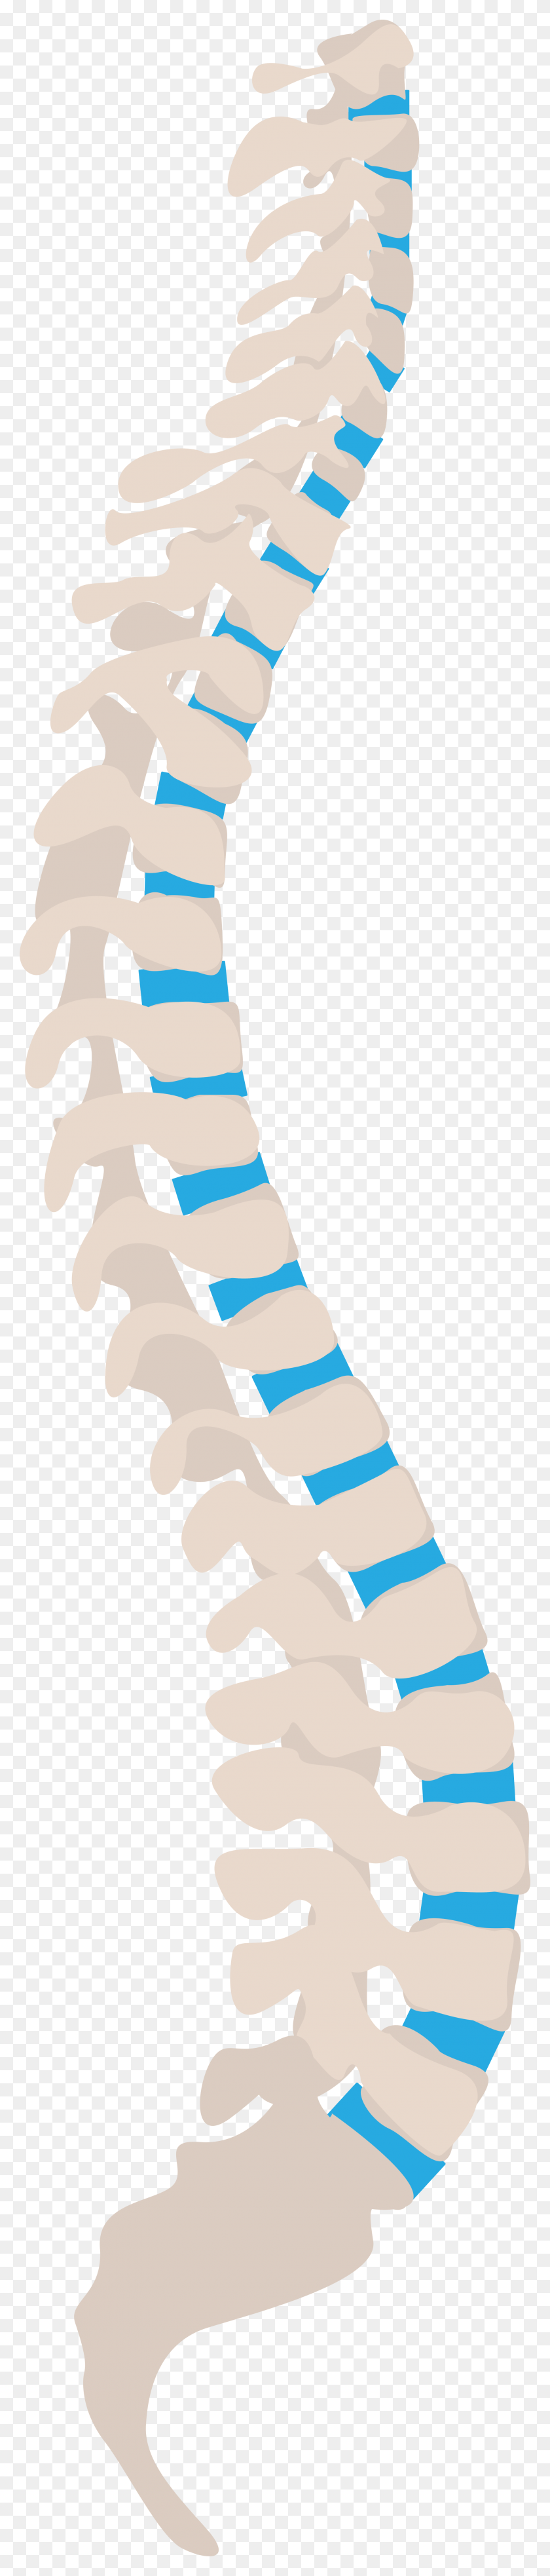 2000x9929 Open Spine Tips For Health Workers, Food, Sweets, Confectionery Descargar Hd Png